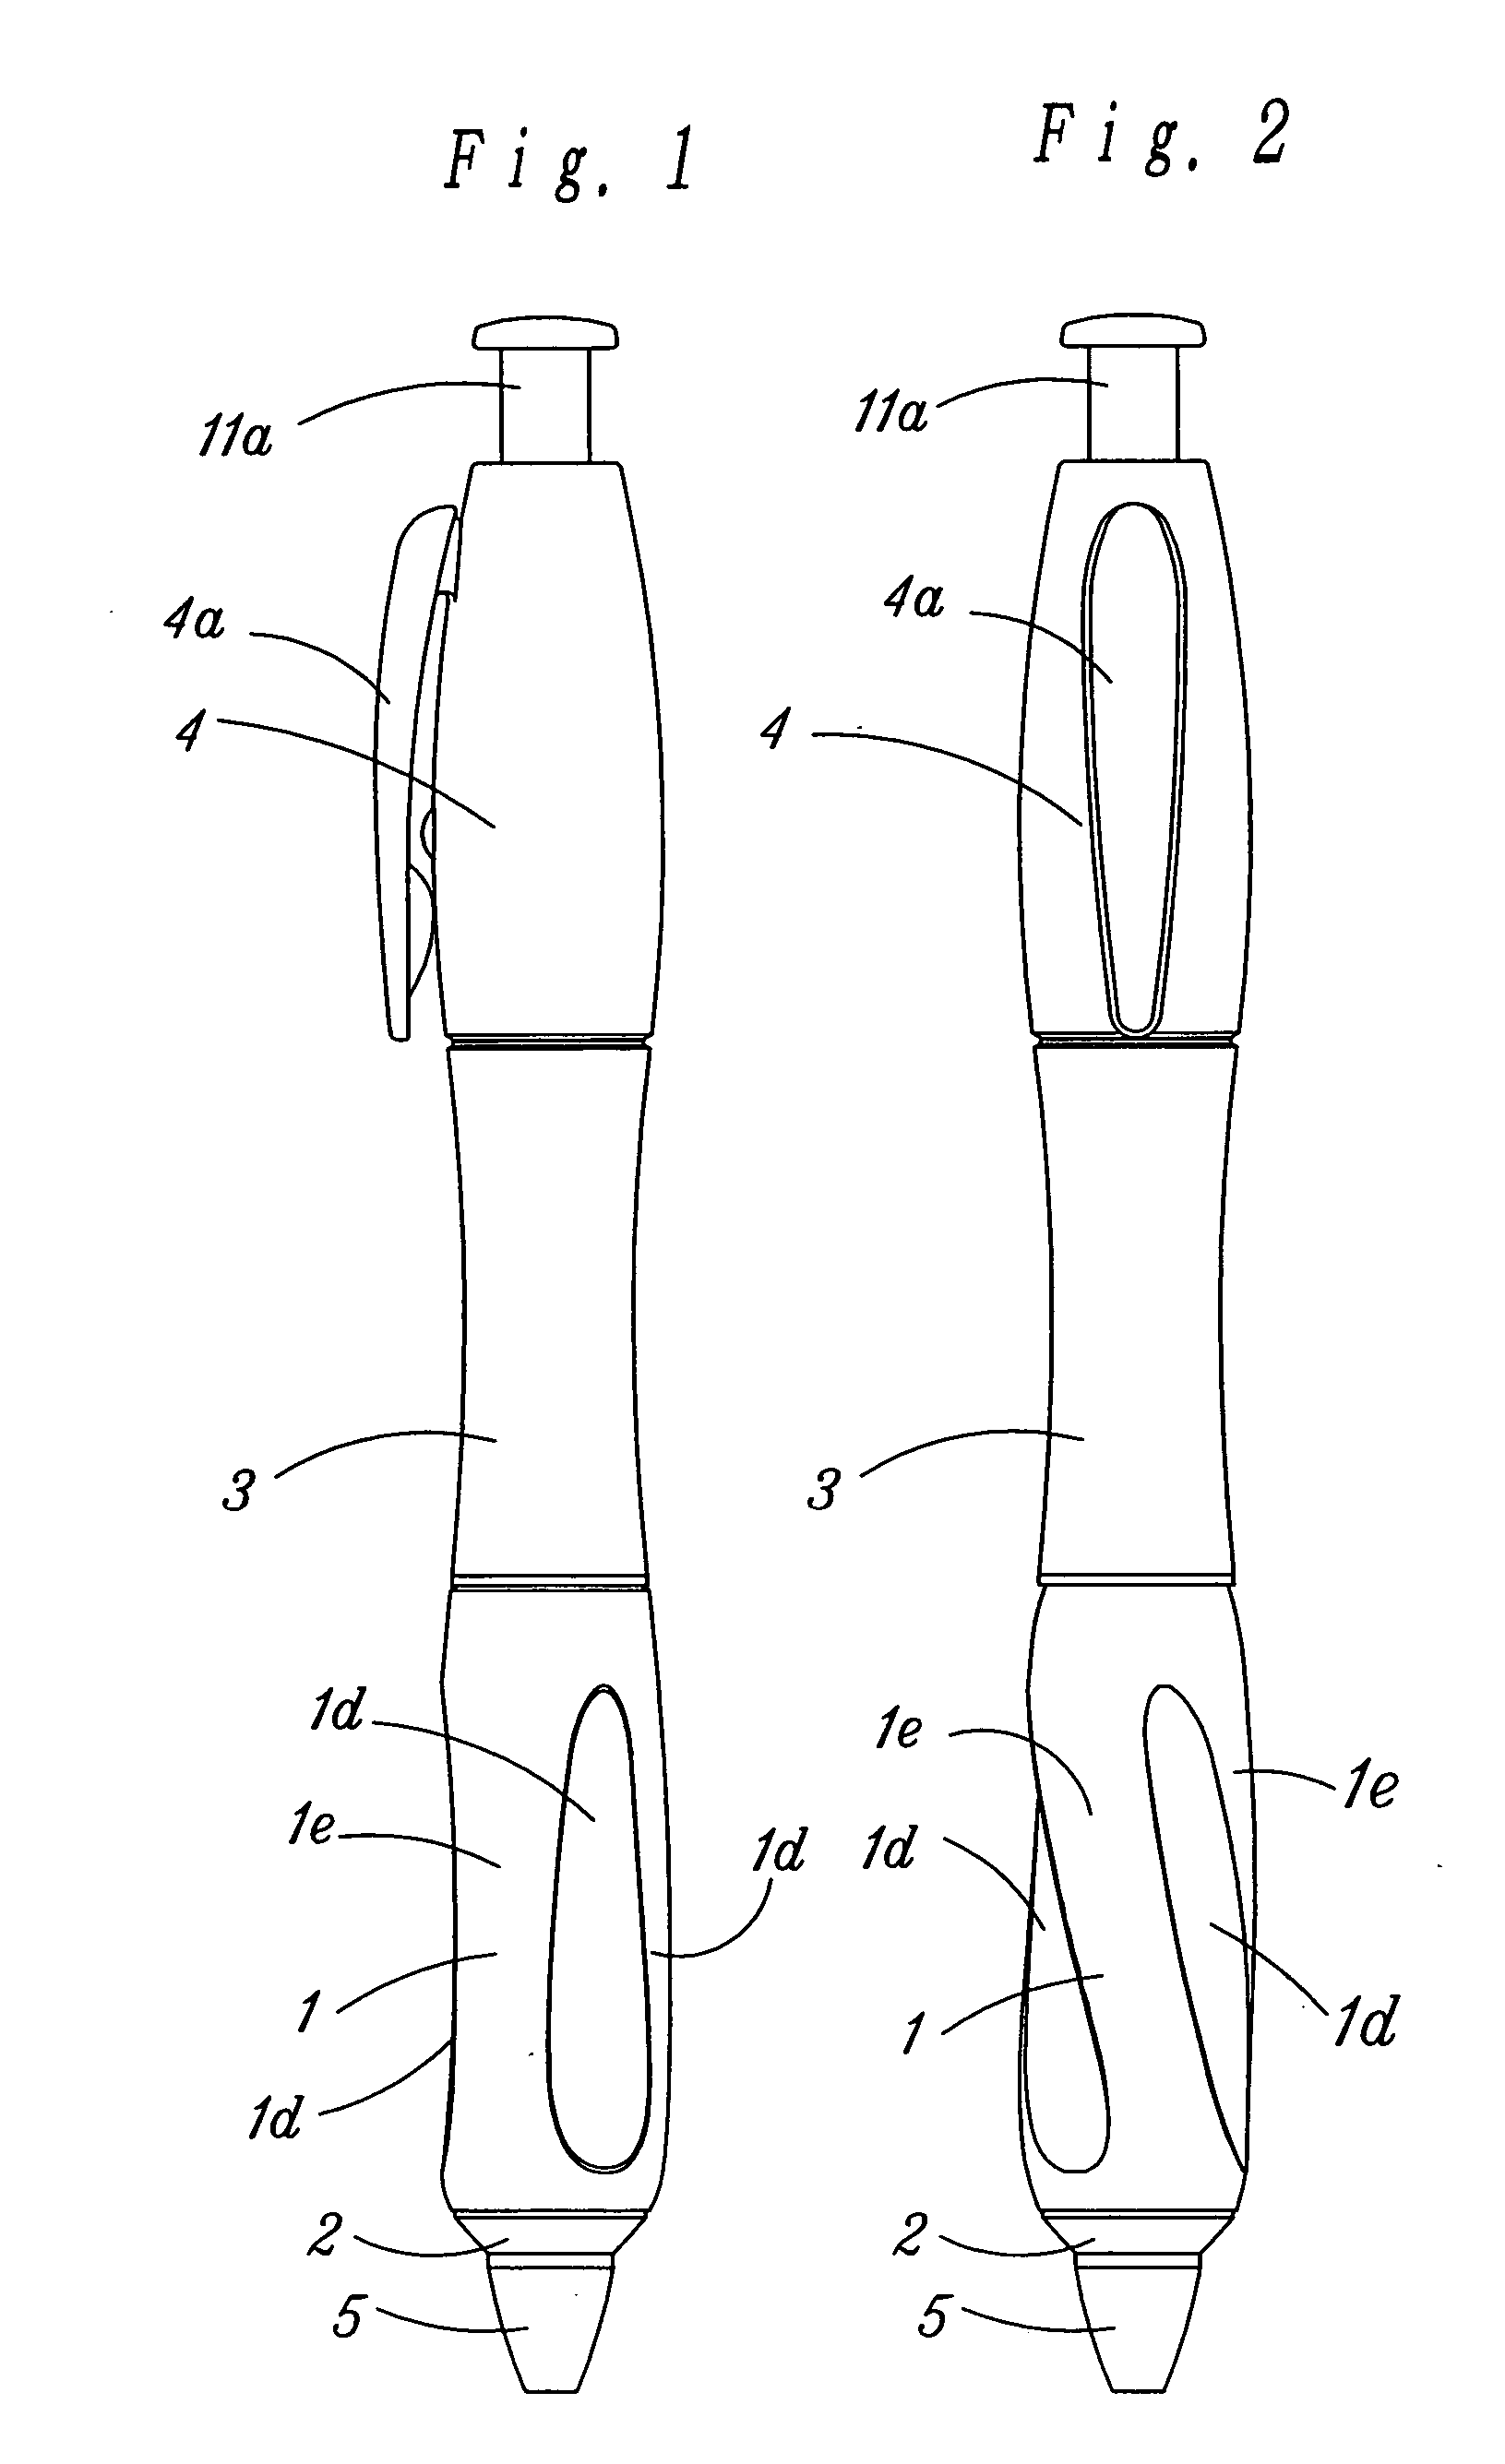 Variable grip structure